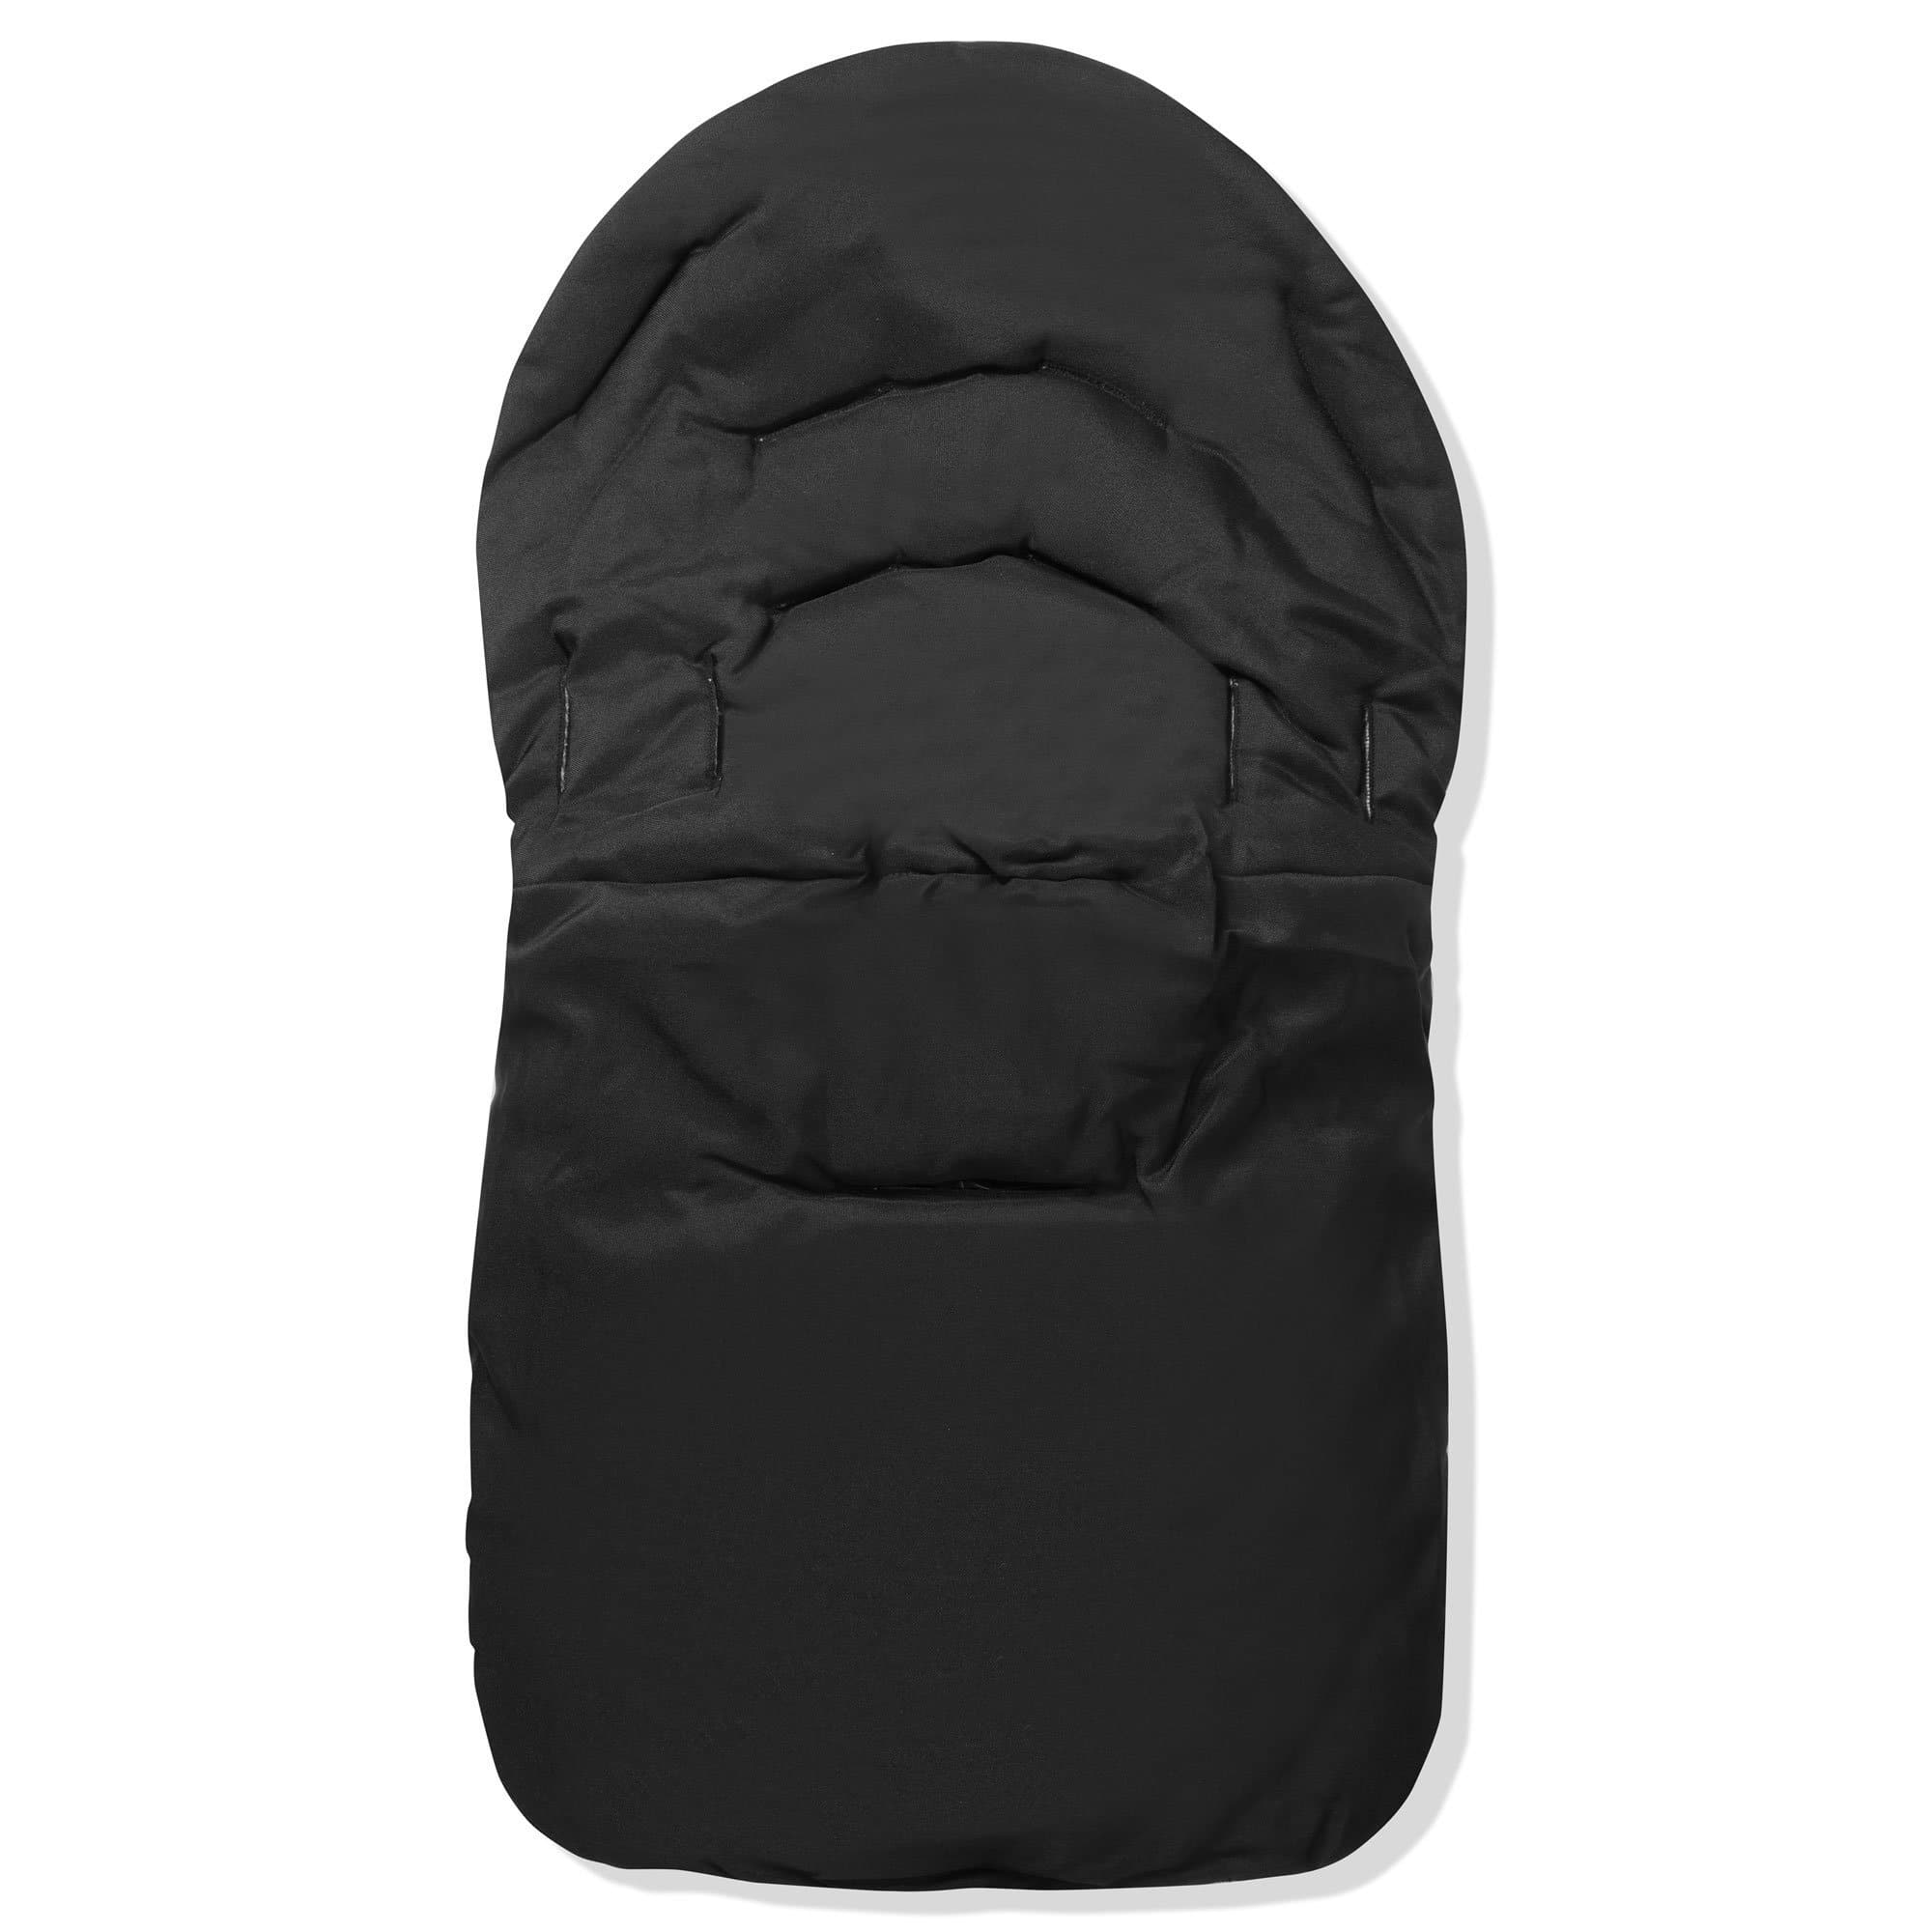 Car Seat Footmuff / Cosy Toes Compatible with My Babiie - For Your Little One